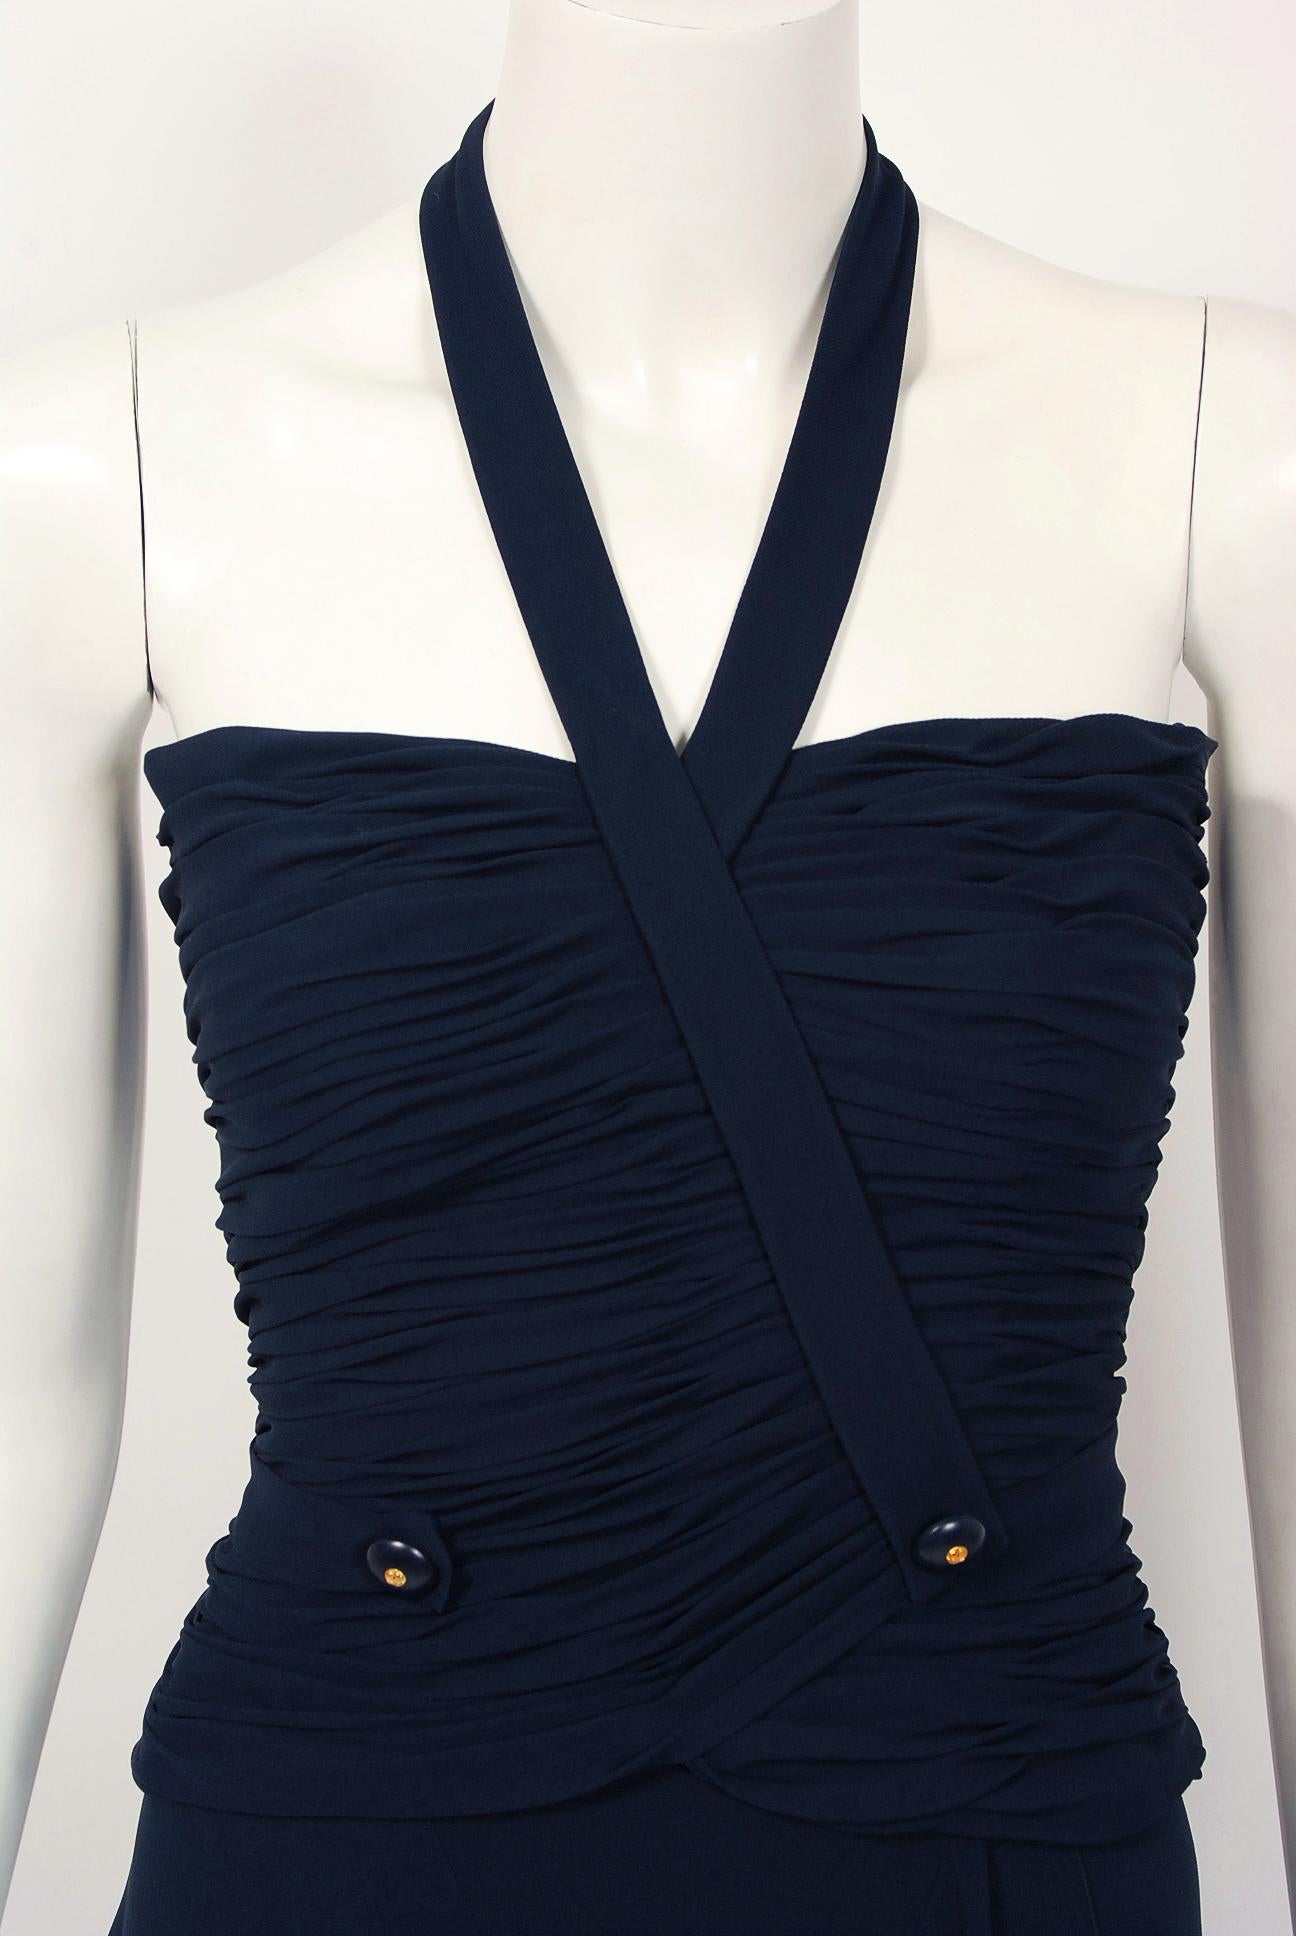 Chanel is known to be one of the most luxurious and decadent fashion houses in the world. This gorgeous navy-blue silk chiffon ensemble from their iconic 1994 collection is a perfect example of why this couture brand has stood the test of time. Not